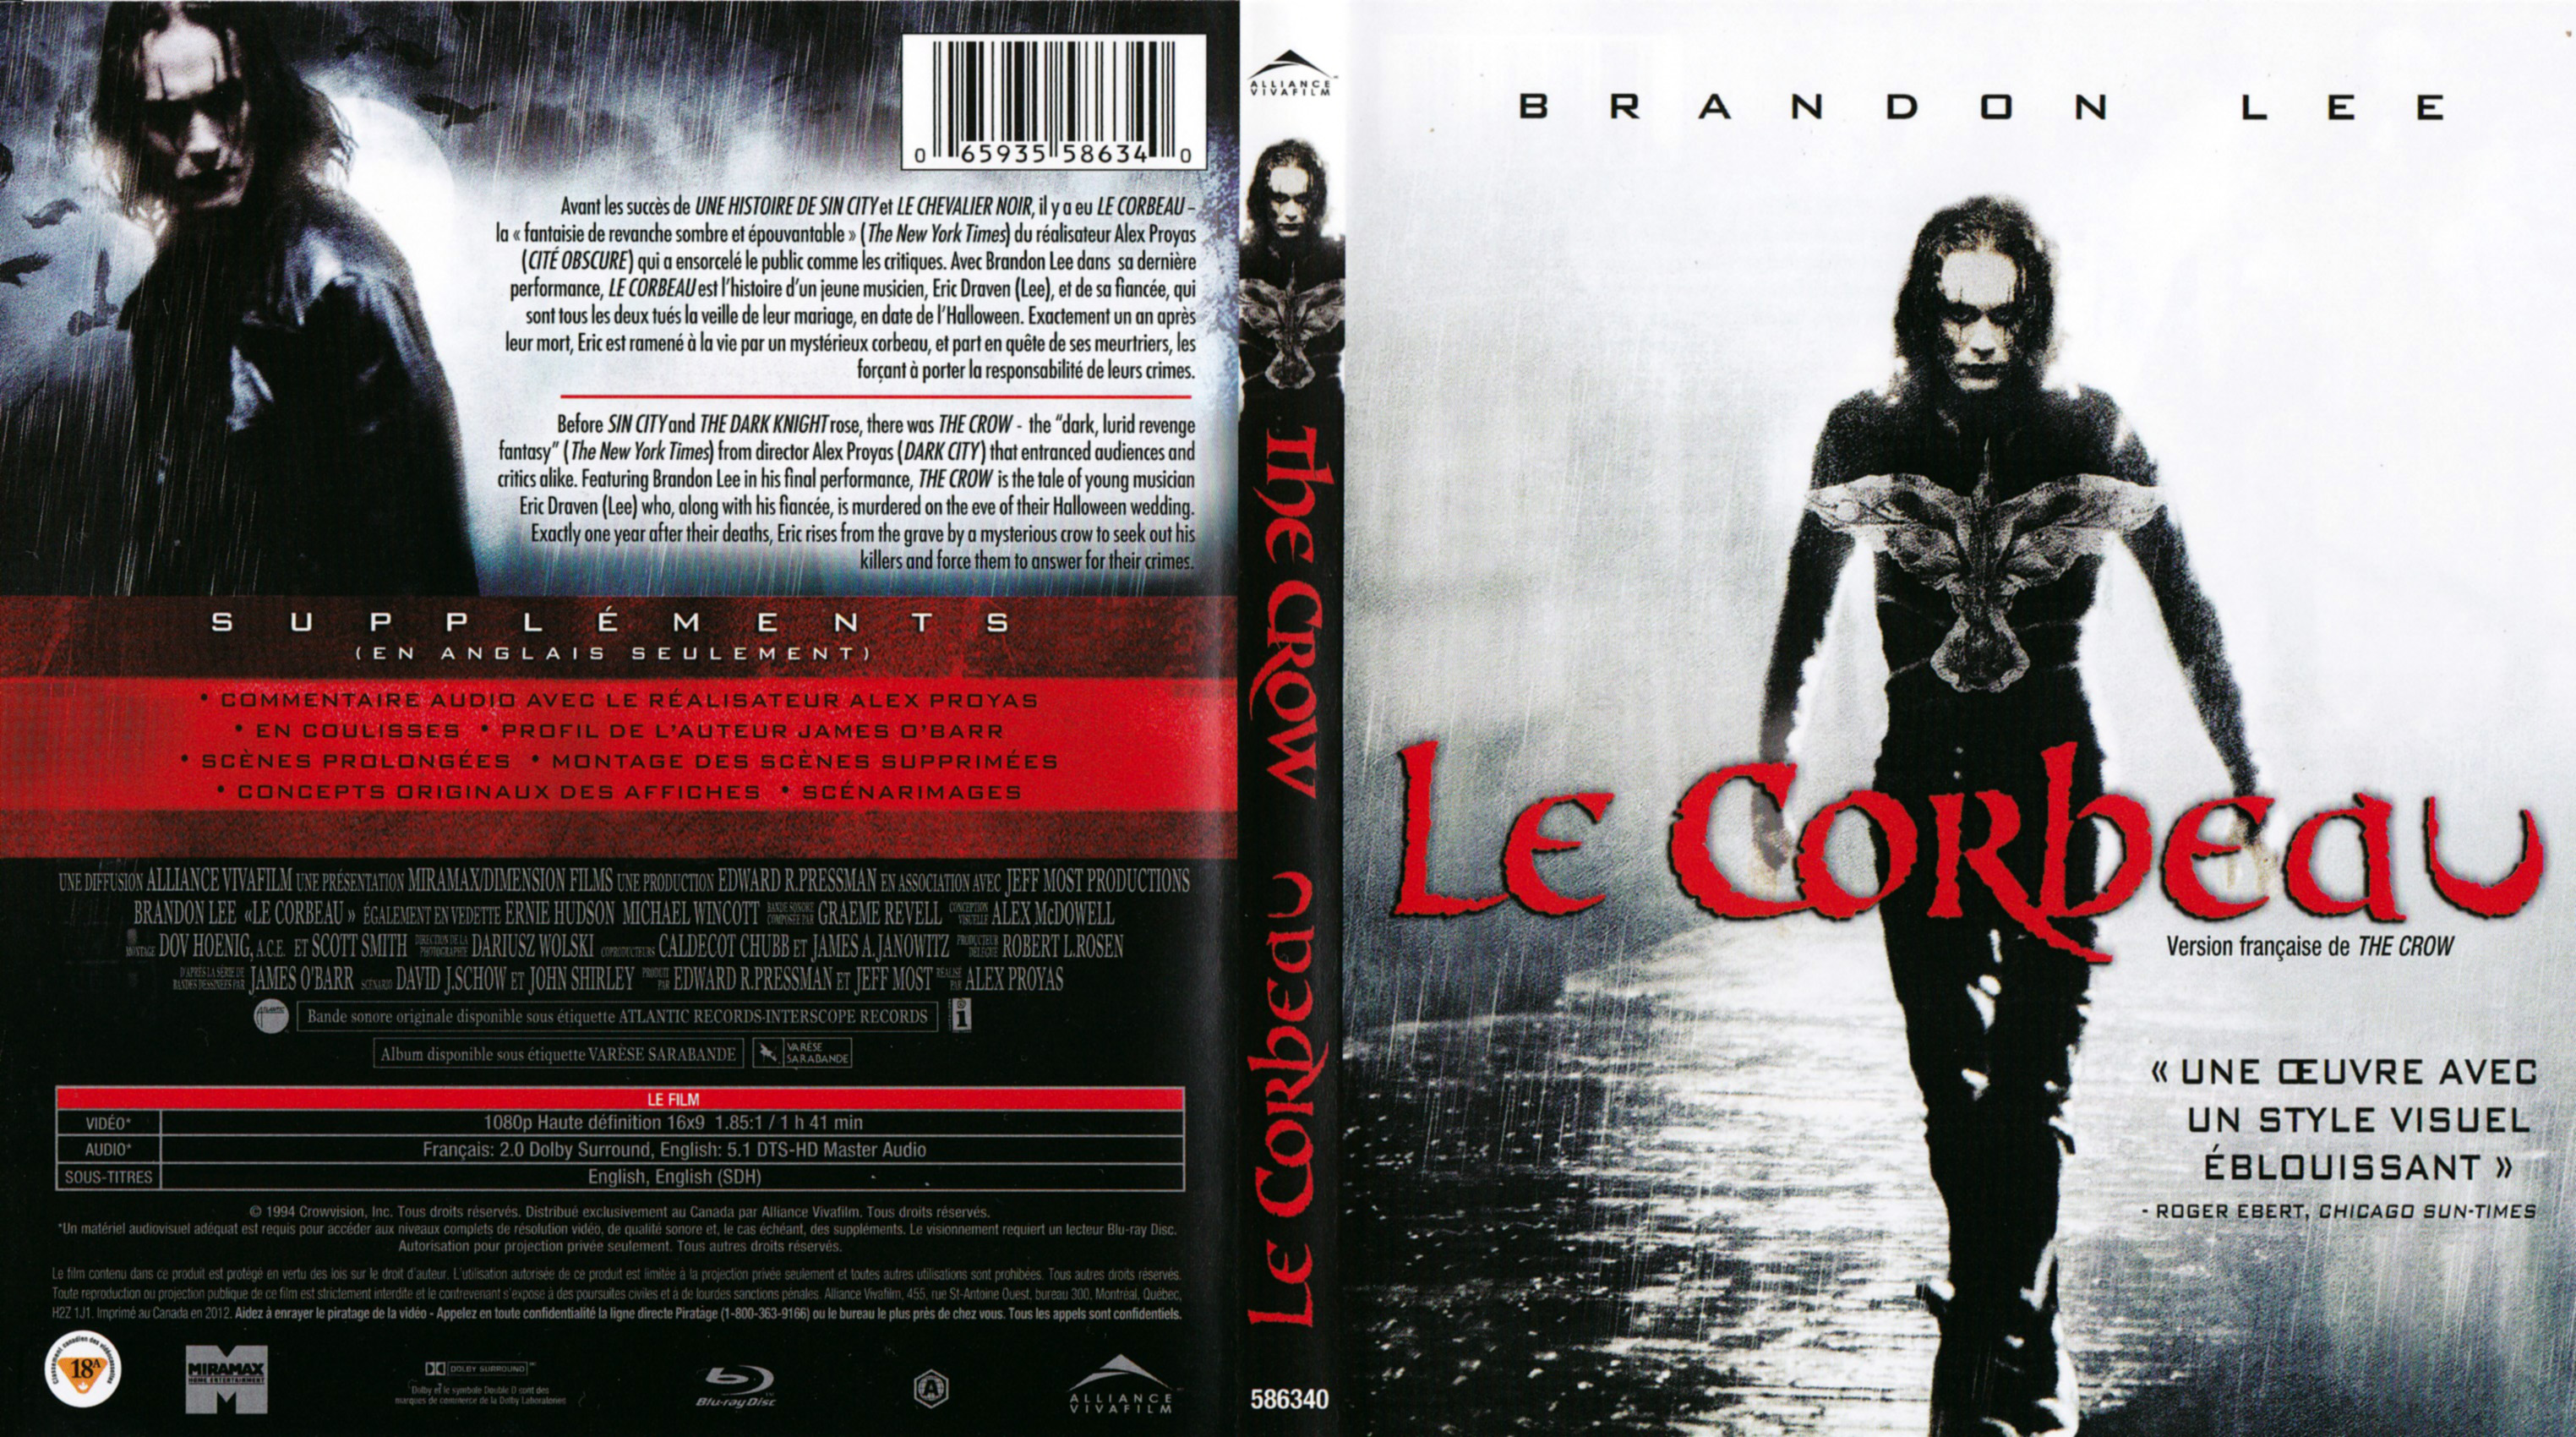 Jaquette DVD Le corbeau - The crow (Canadienne) (BLU-RAY)